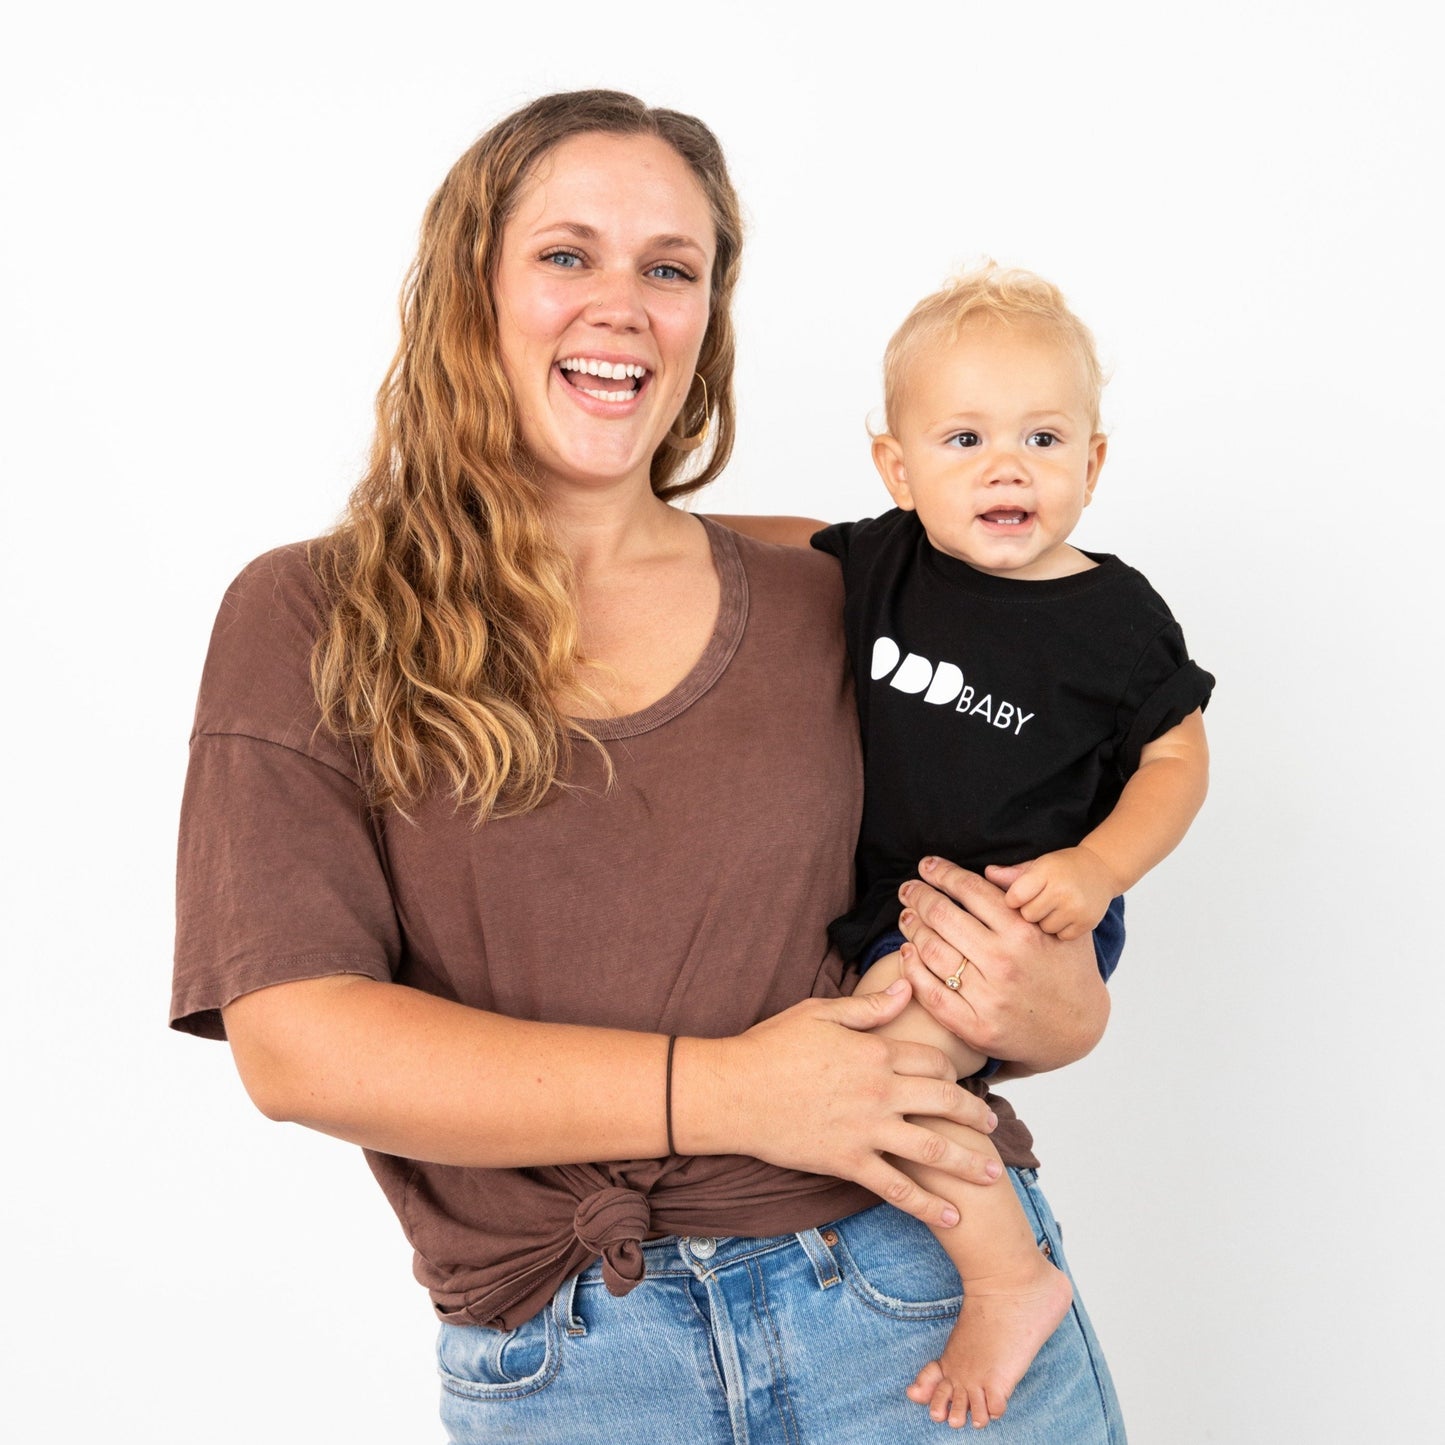 Woman holding baby in black tee with ODD baby written in white letters